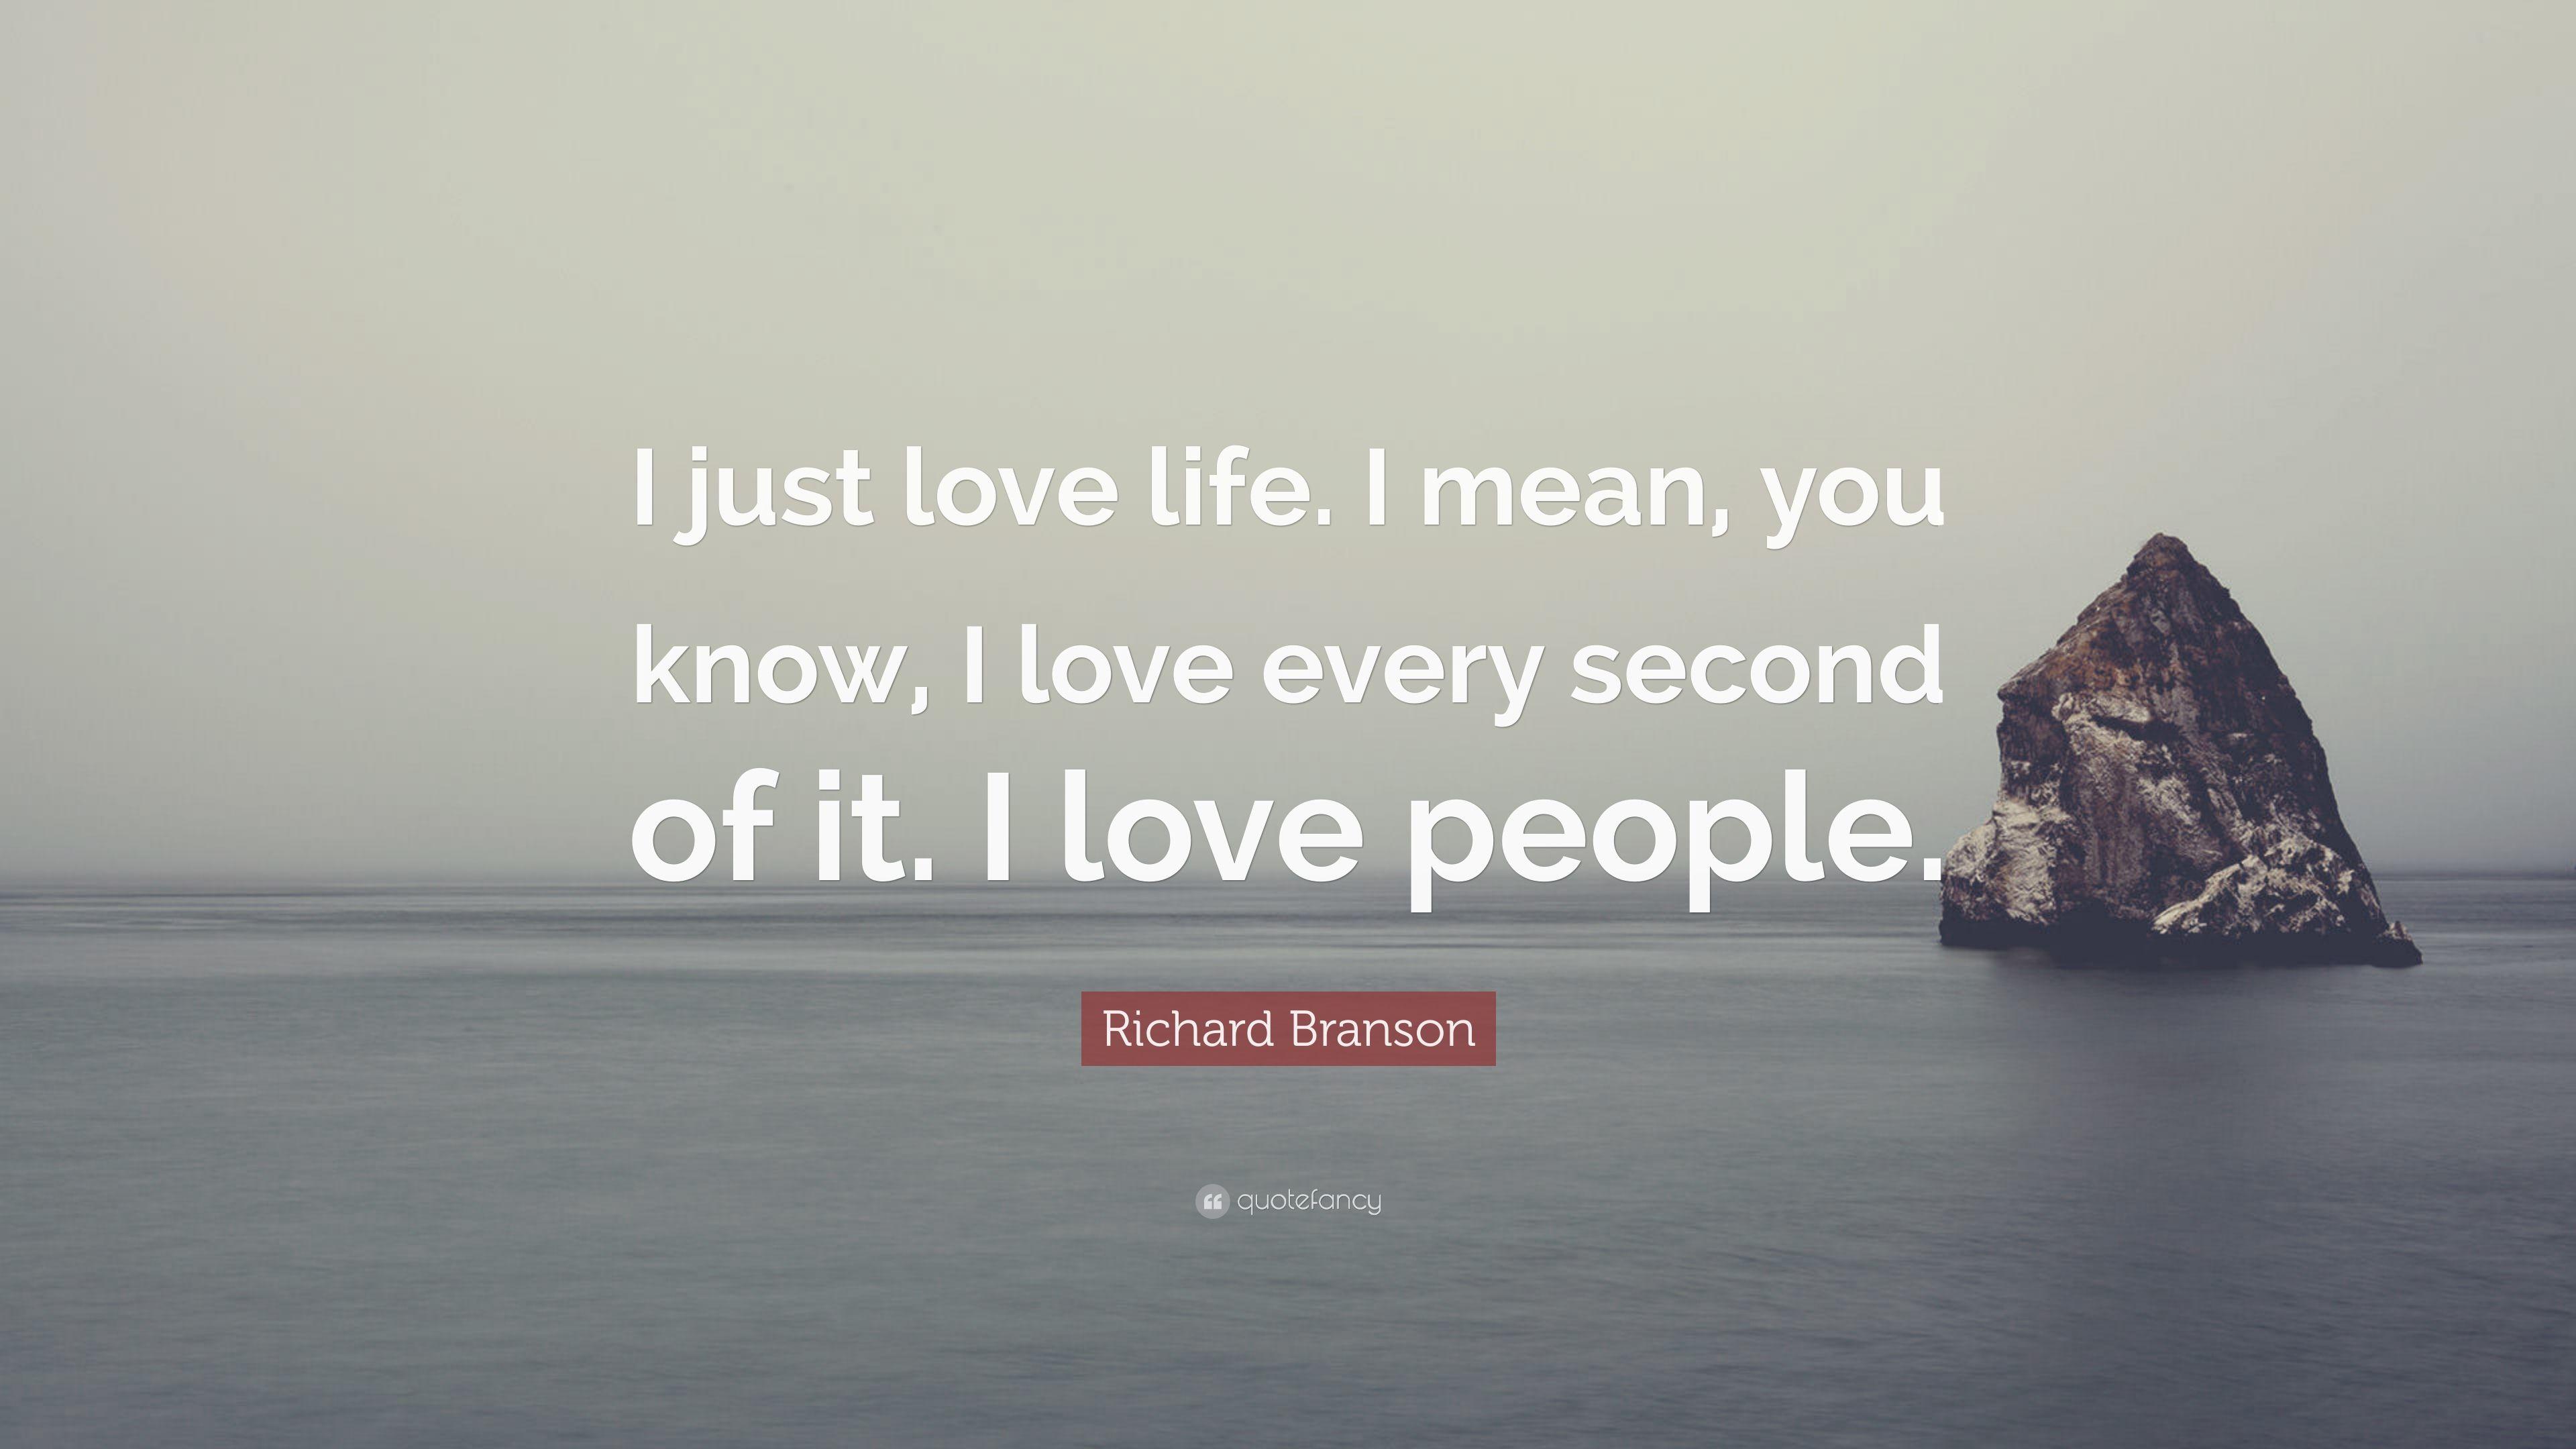 Richard Branson Quote: “I just love life. I mean, you know, I love